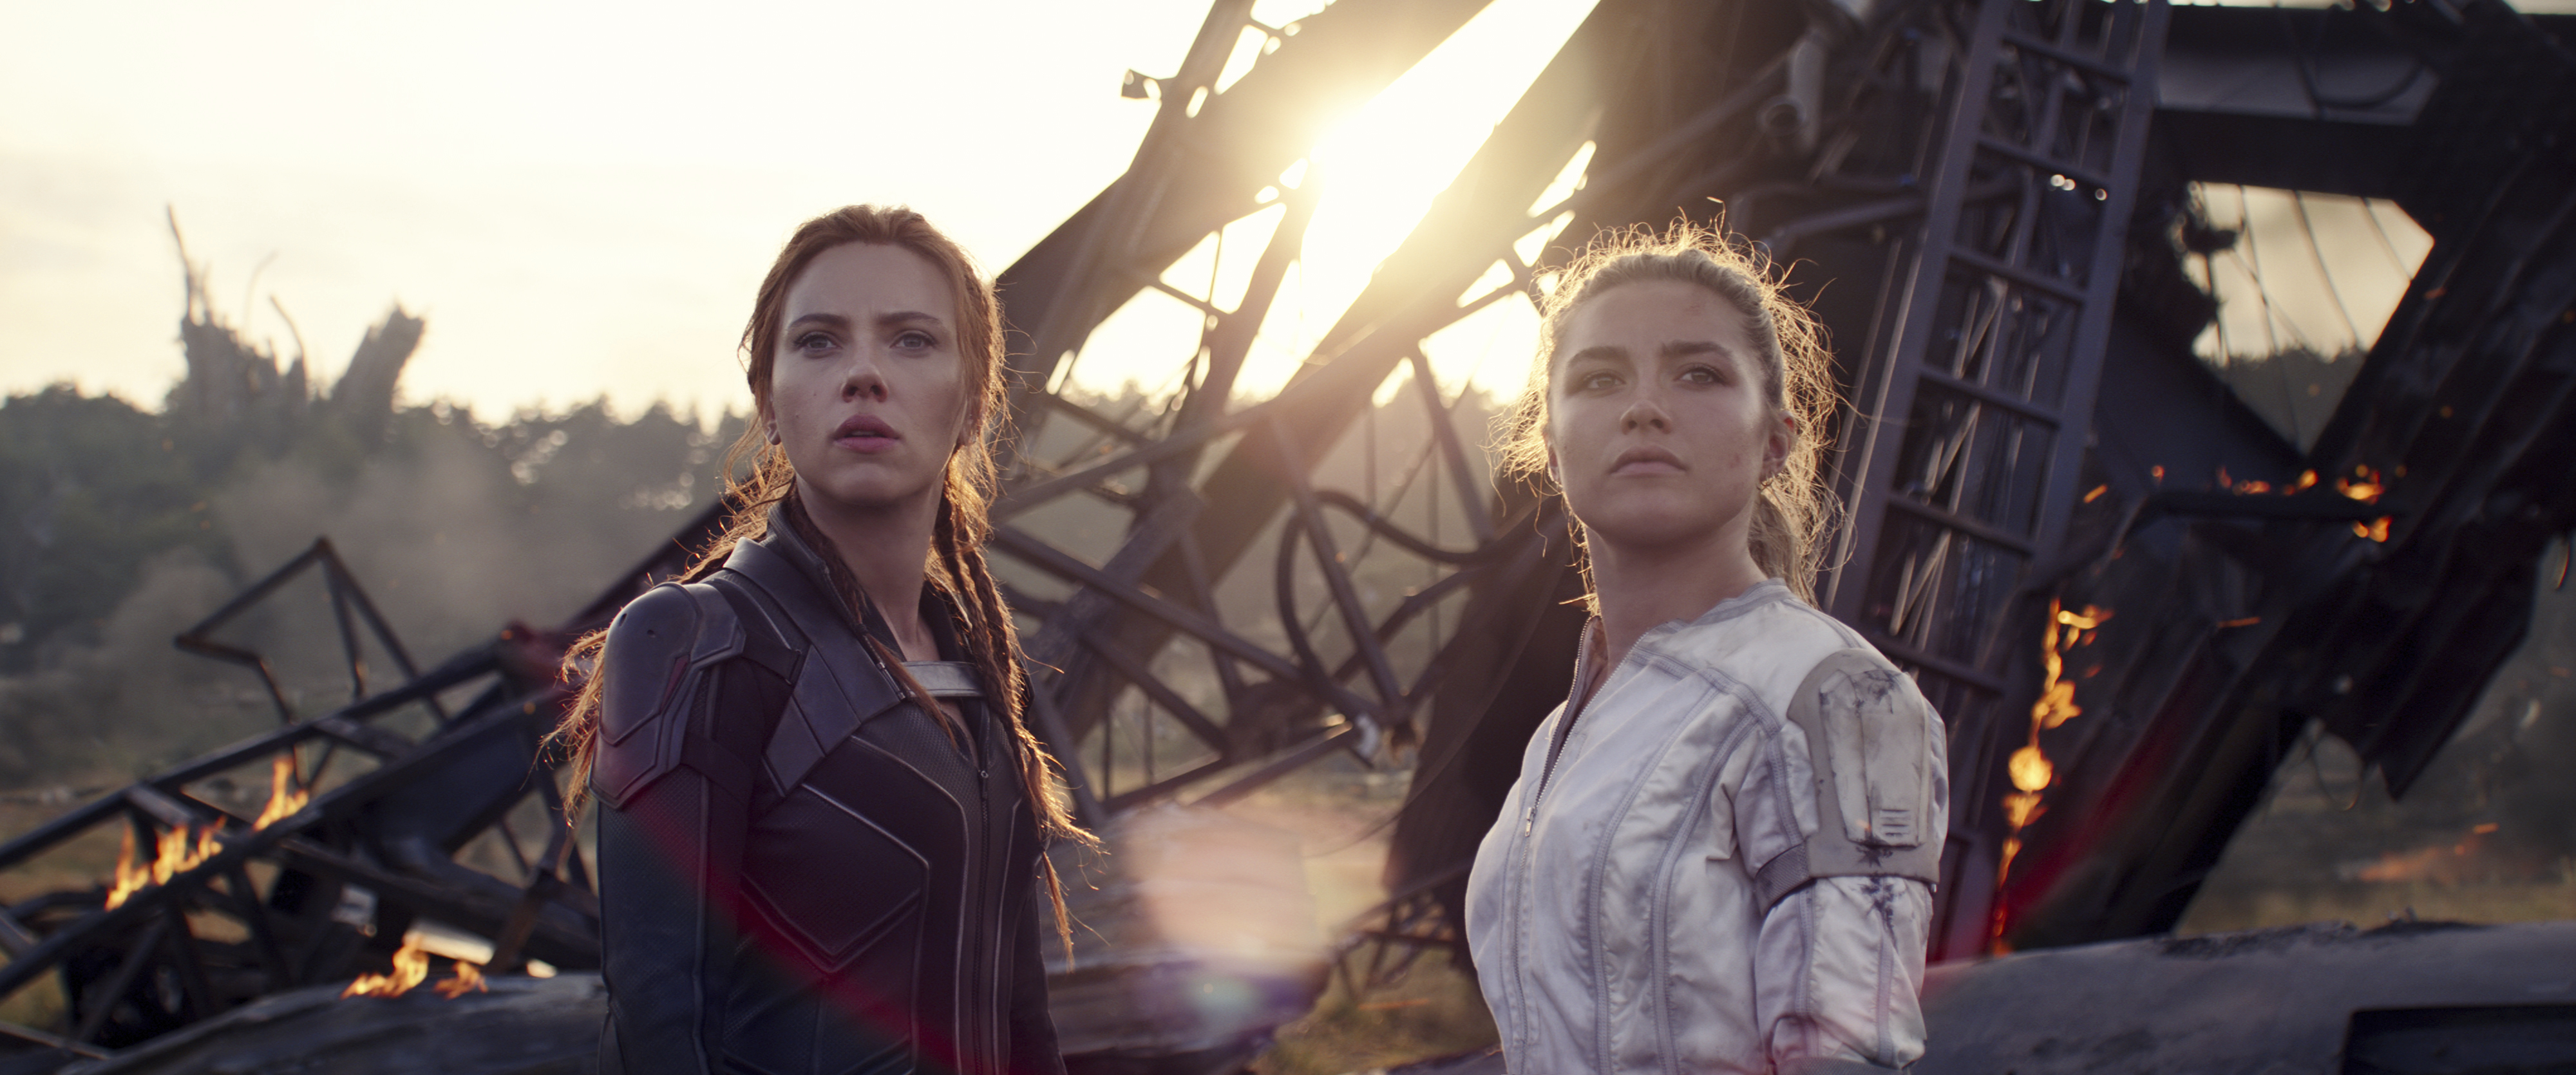 Scarlett Johansson, left, and Florence Pugh in a scene from Black Widow.